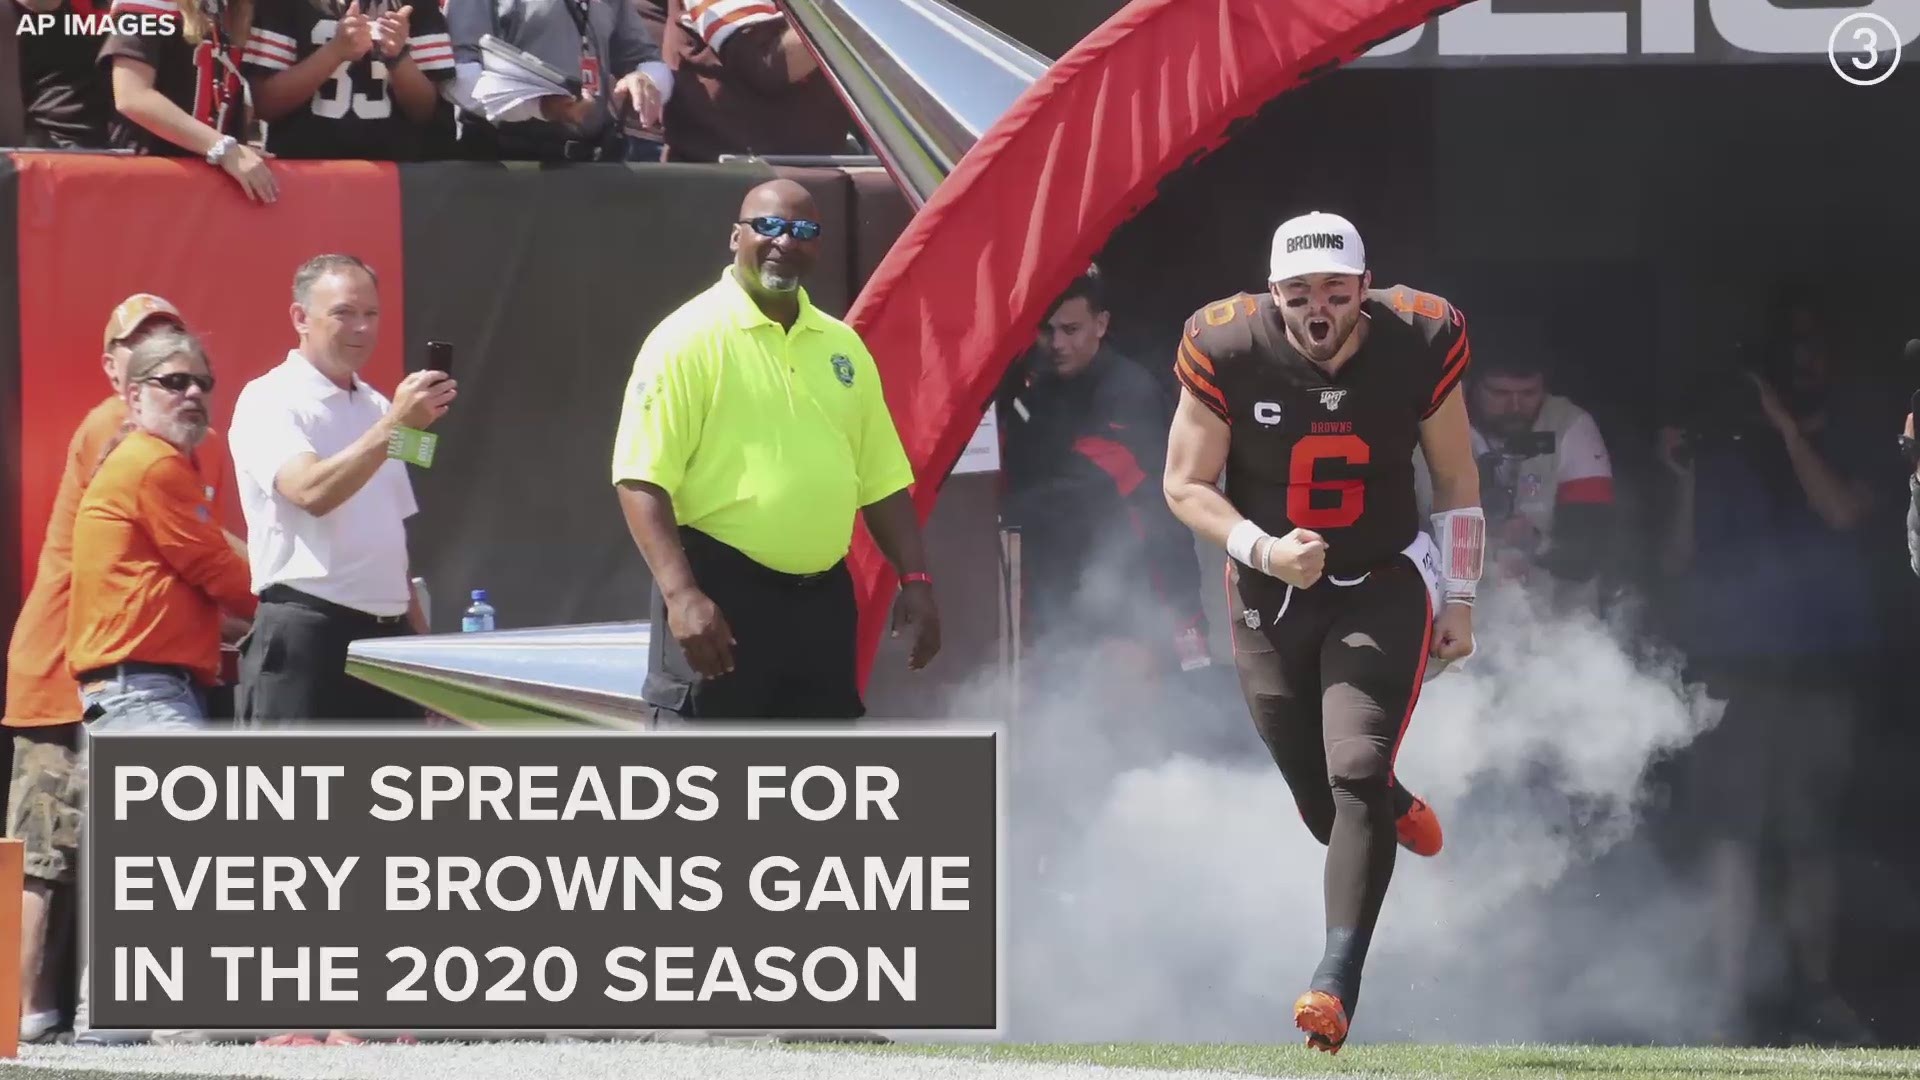 Place your bets Browns' fans!  BetOnline.ag has released point spreads for all 16 games on the Cleveland Browns' 2020 NFL schedule.